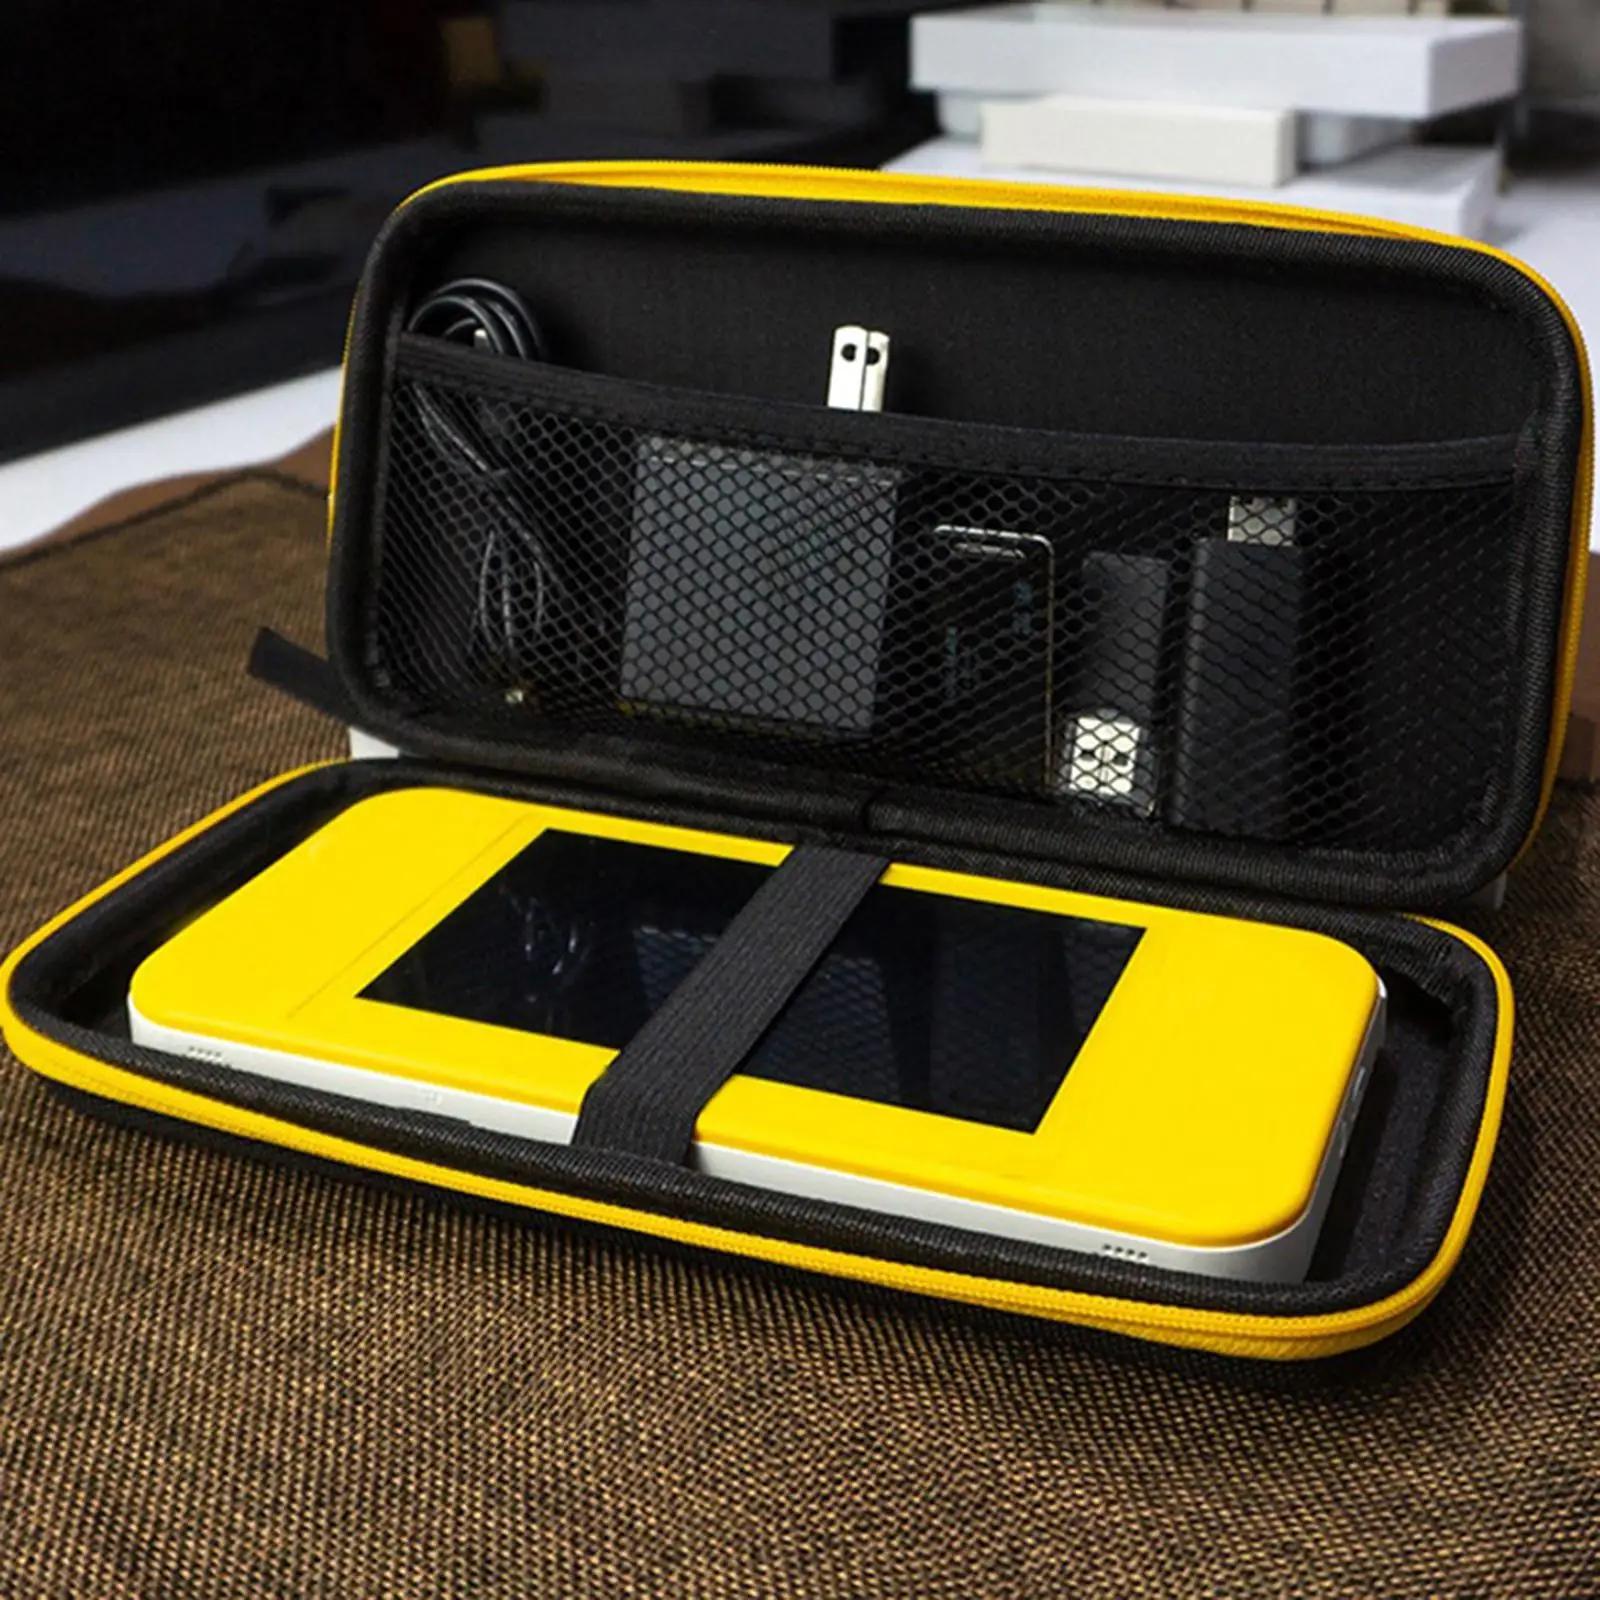 Shockproof Carrying Case Screen Protect Storage Bag Dustproof Black Portable Hard Shell Pouch EVA Case Accessories for Pocket 3